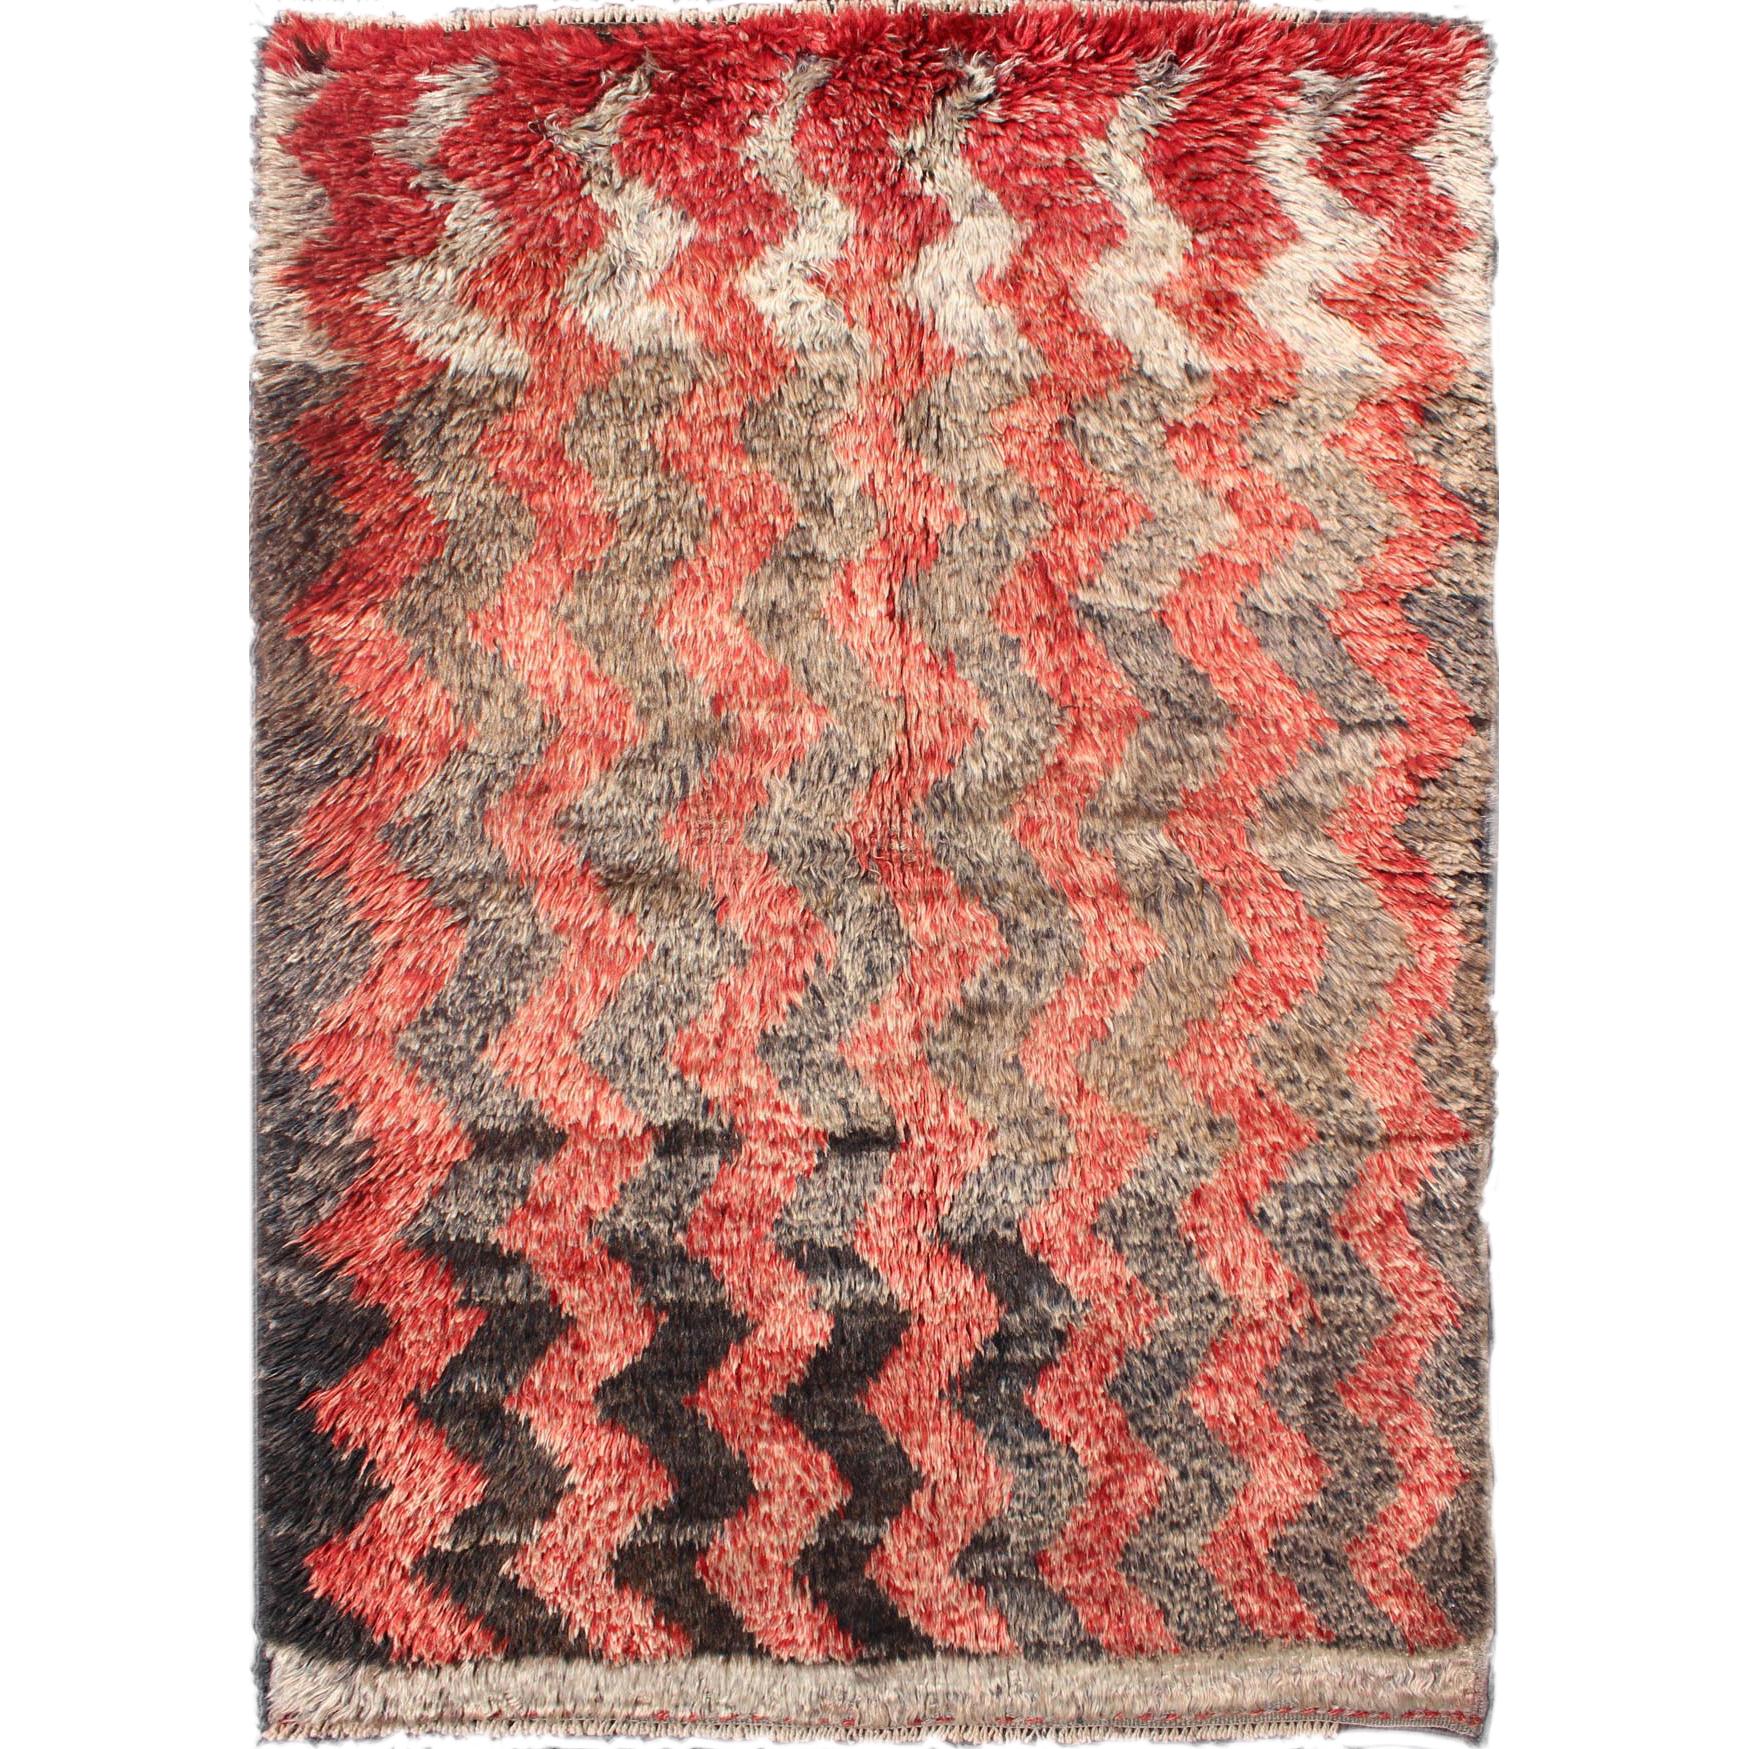 Turkish Tulu Carpet with Zig-Zag Stripe Pattern in Gray, Charcoal and Red